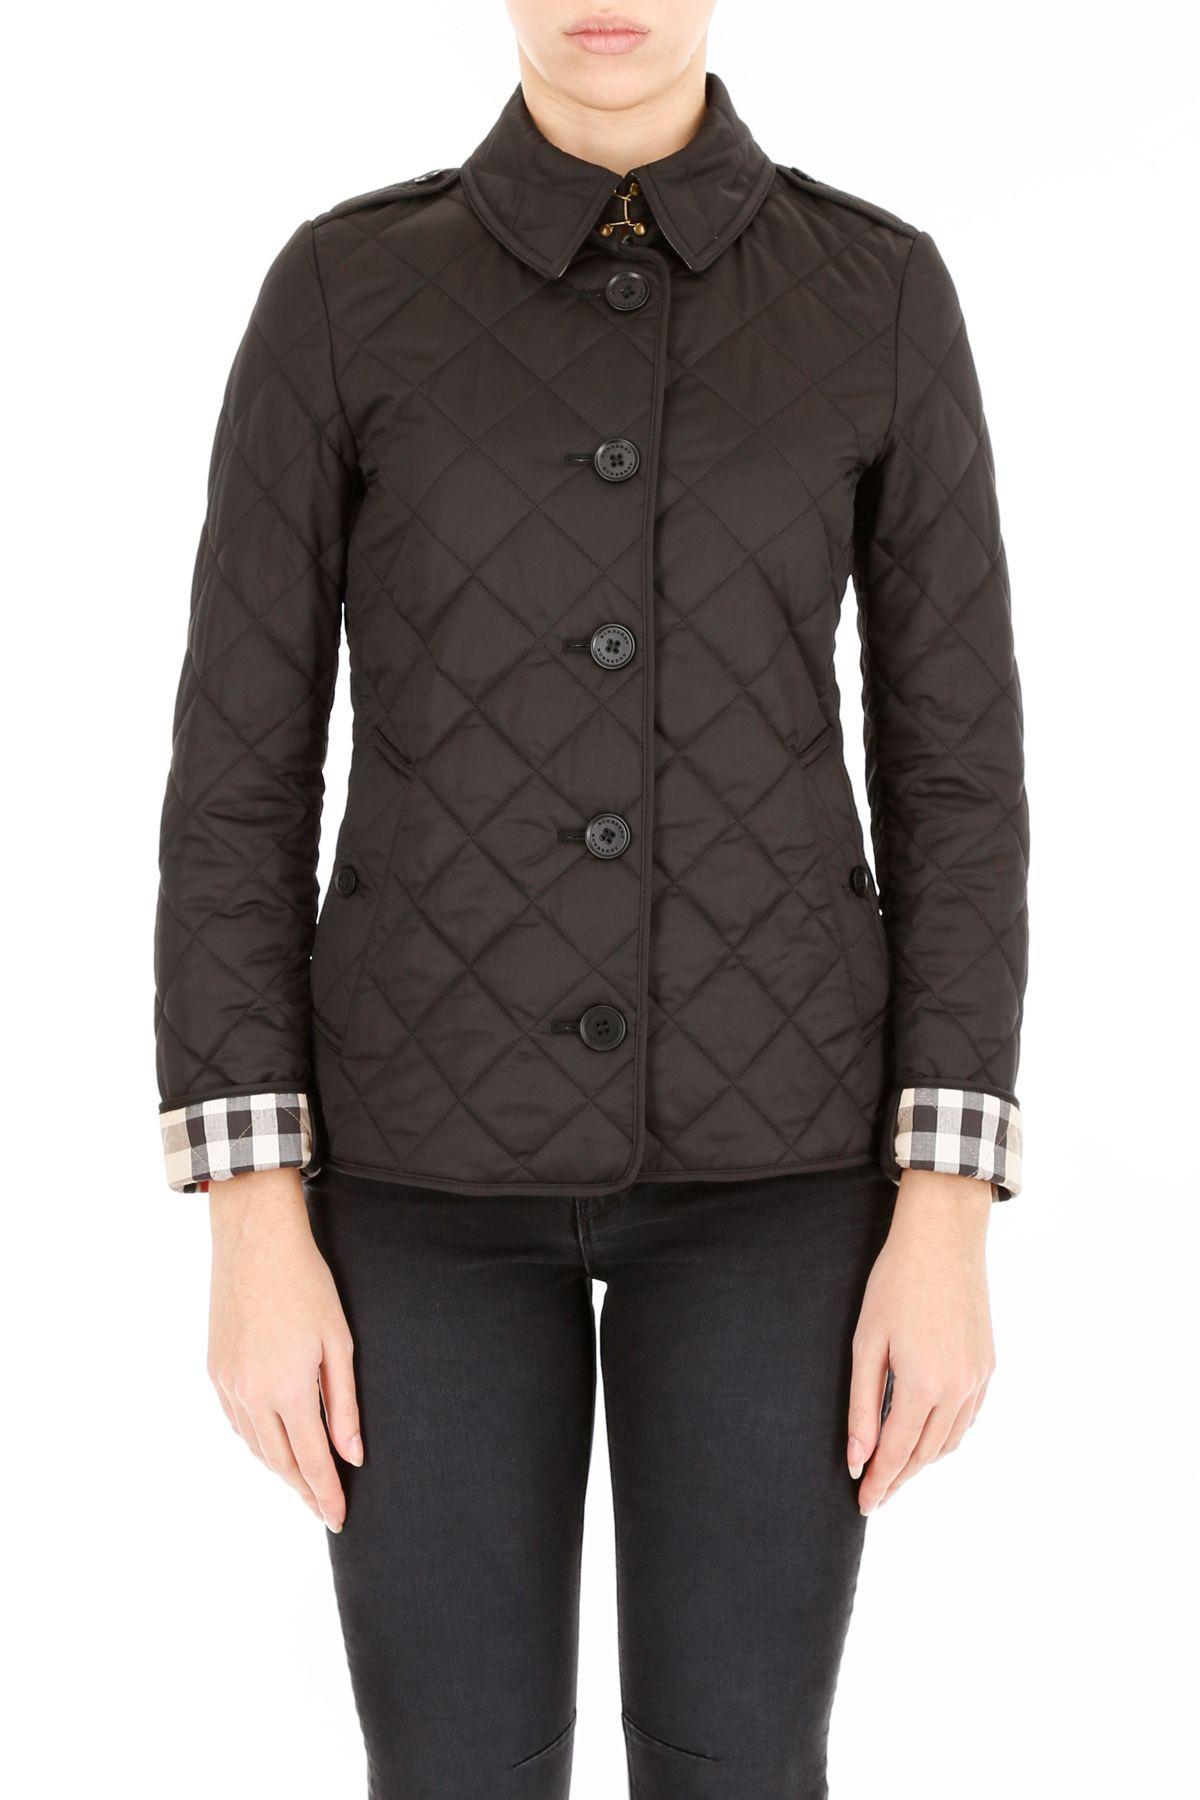 burberry frankby quilted jacket black